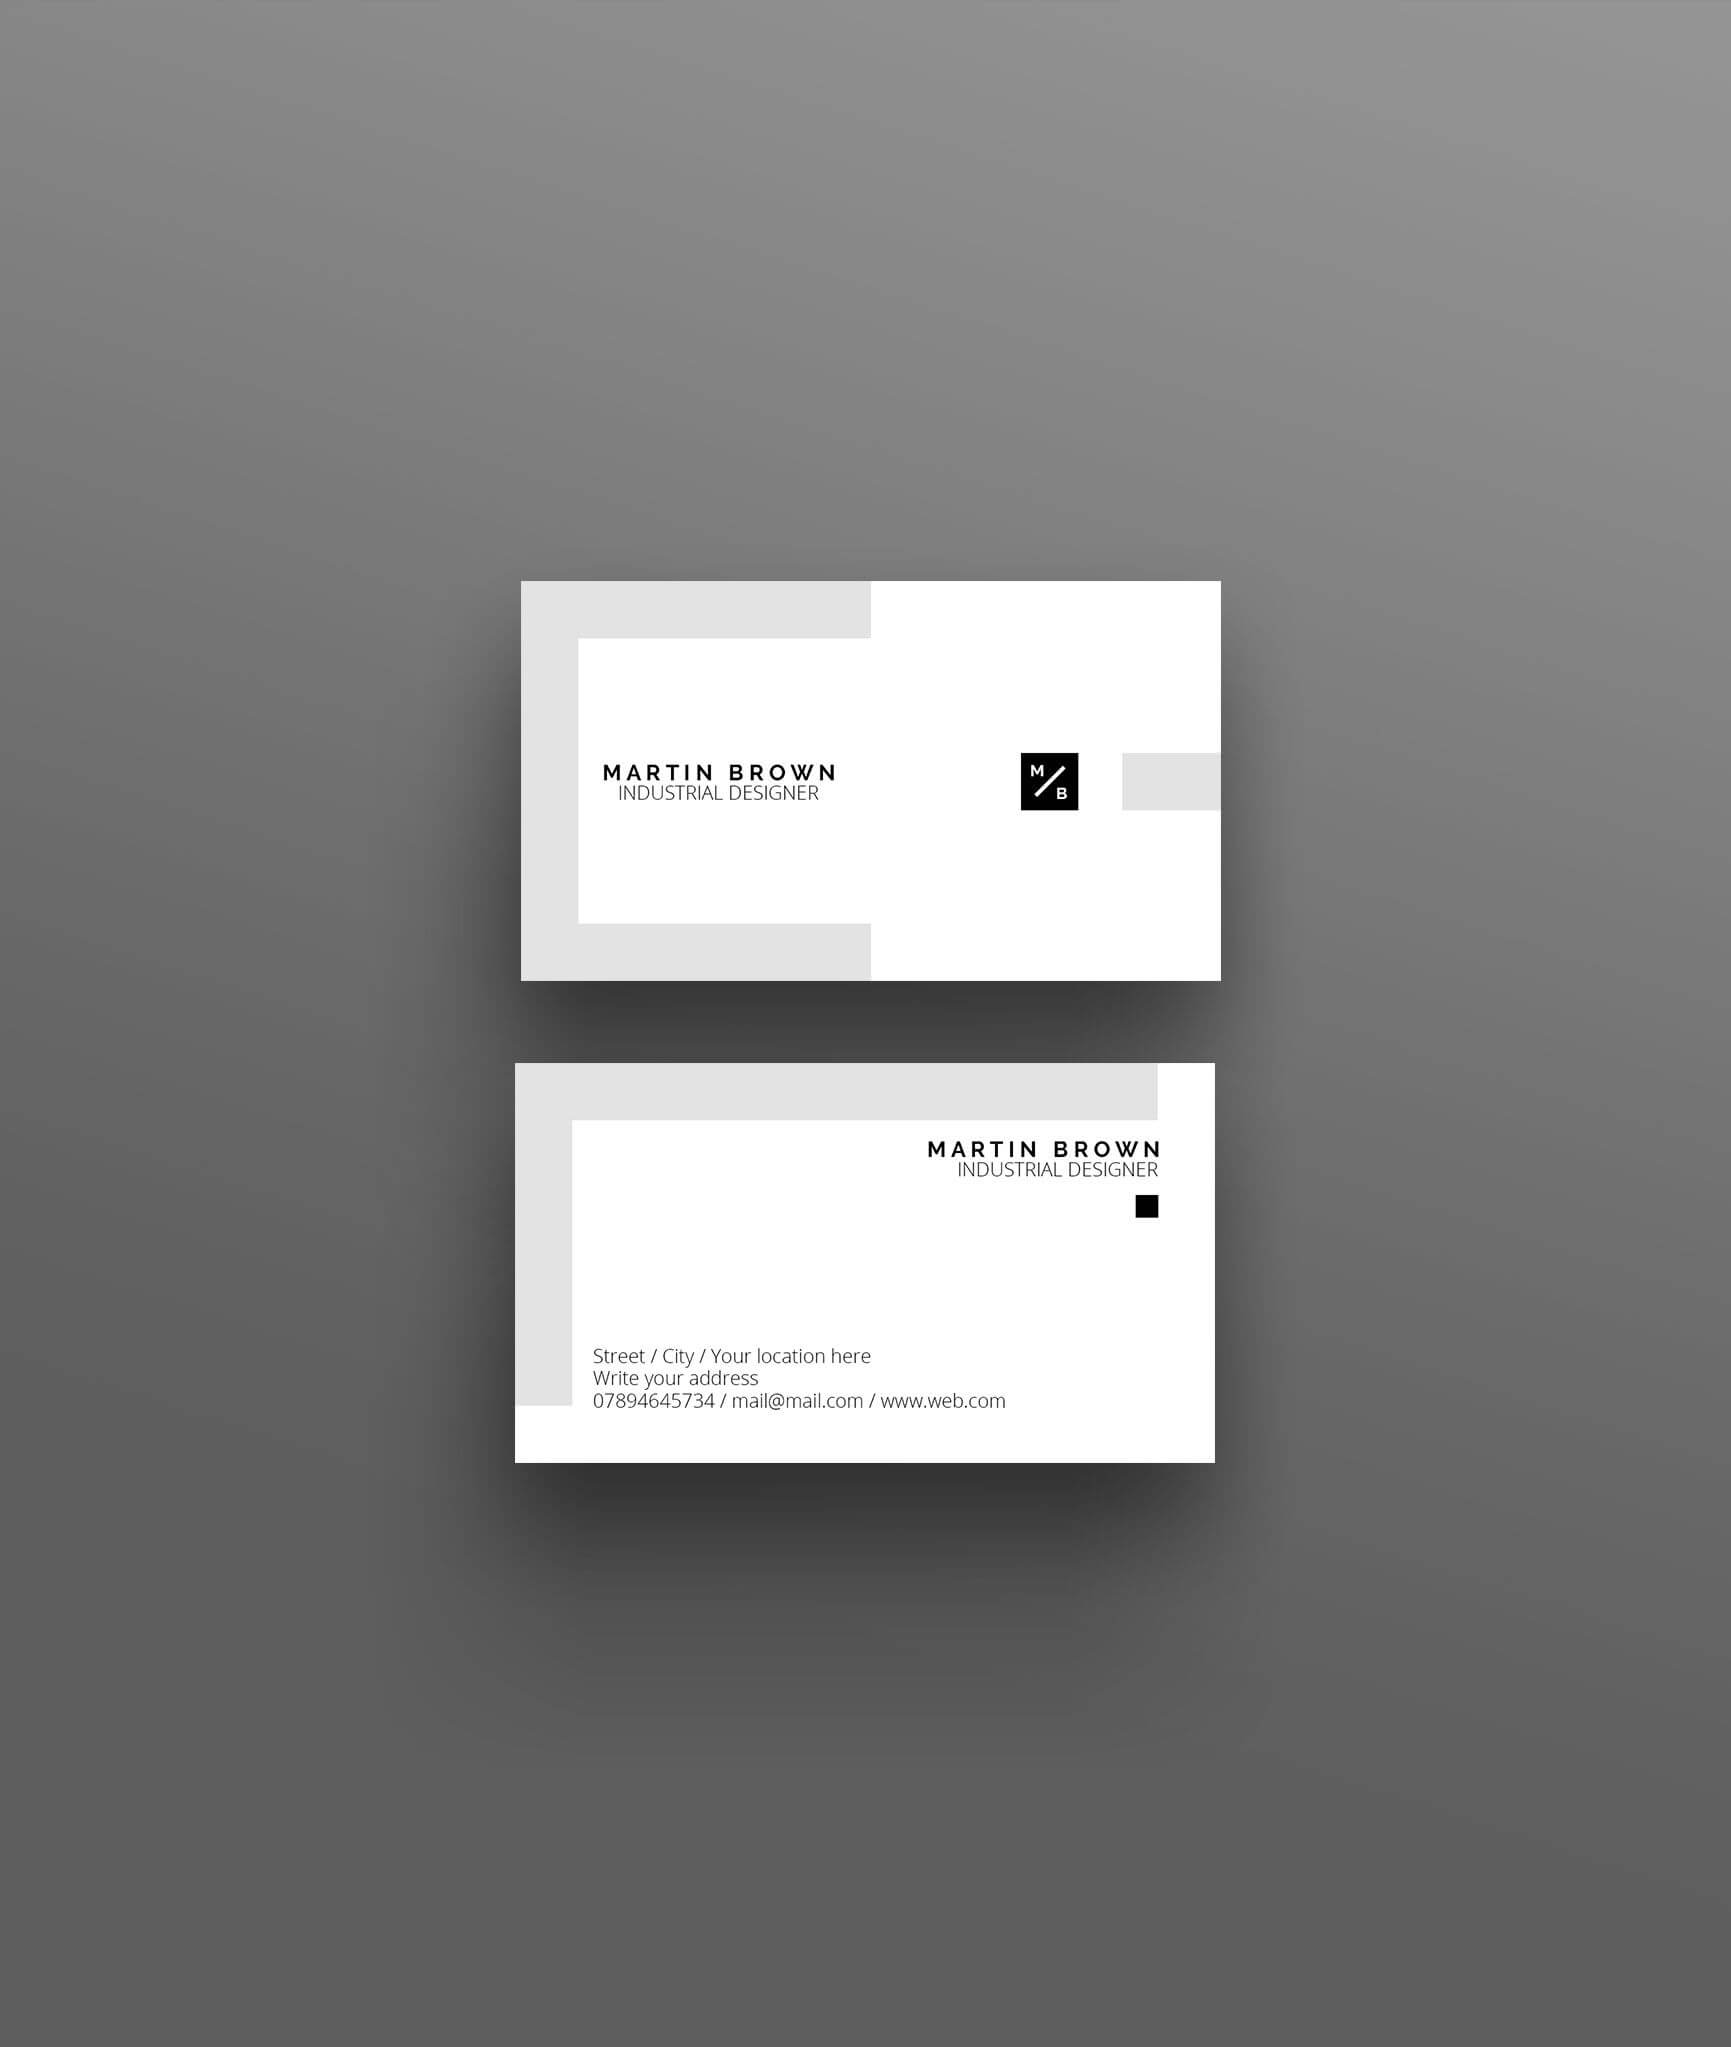 Business Card Template For Adobe Photoshop / Psd File With Regard To Name Card Photoshop Template